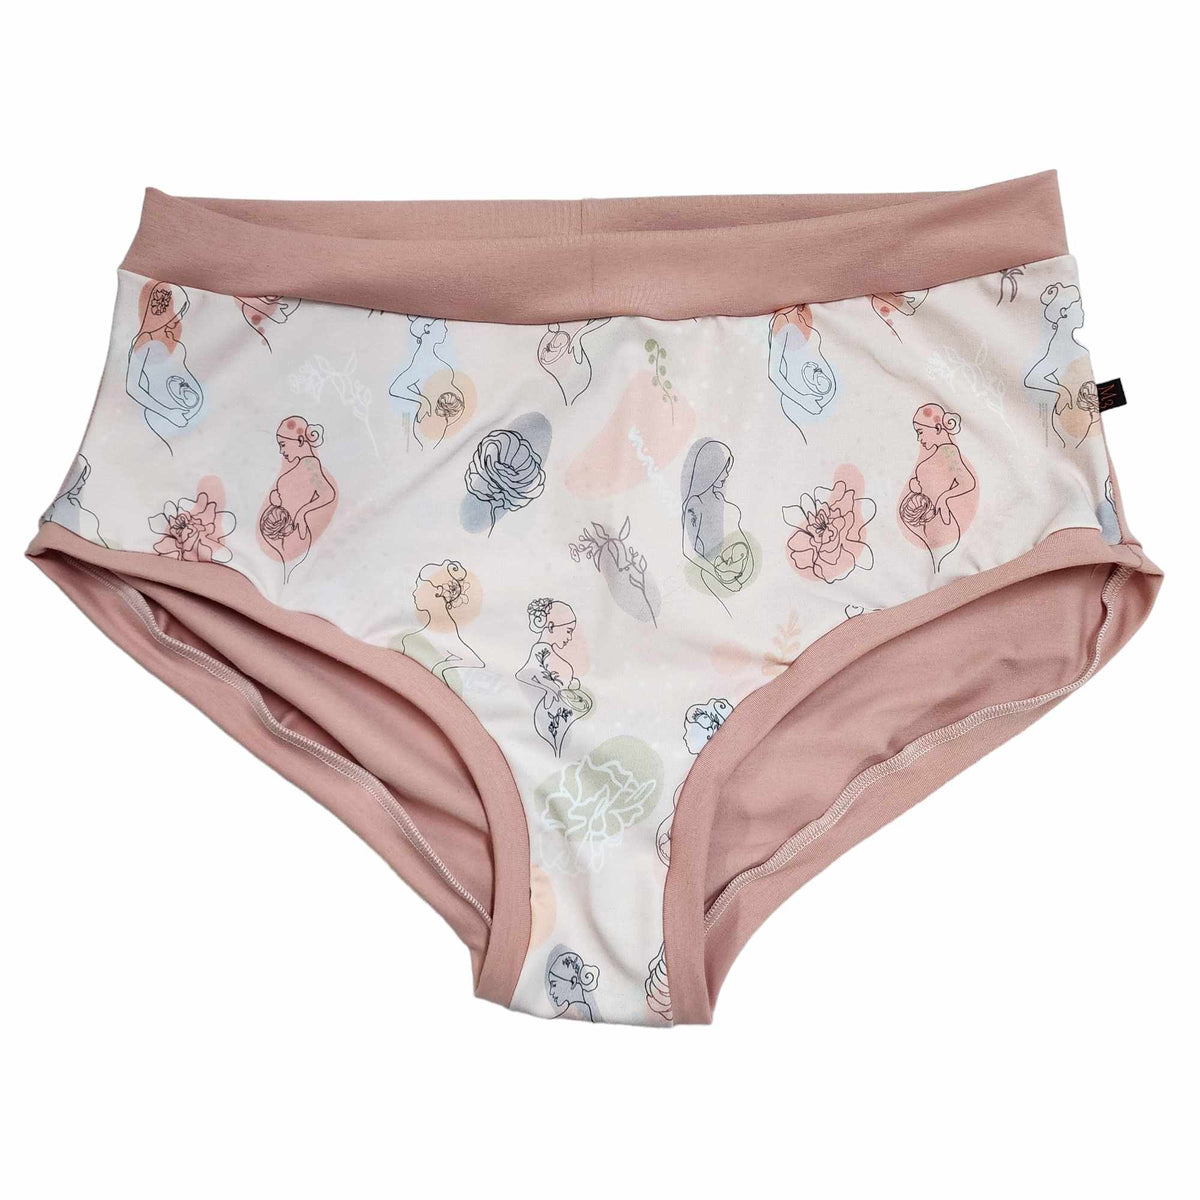 M3 Creations | Women's Panties | Maternal tenderness (ready to go)